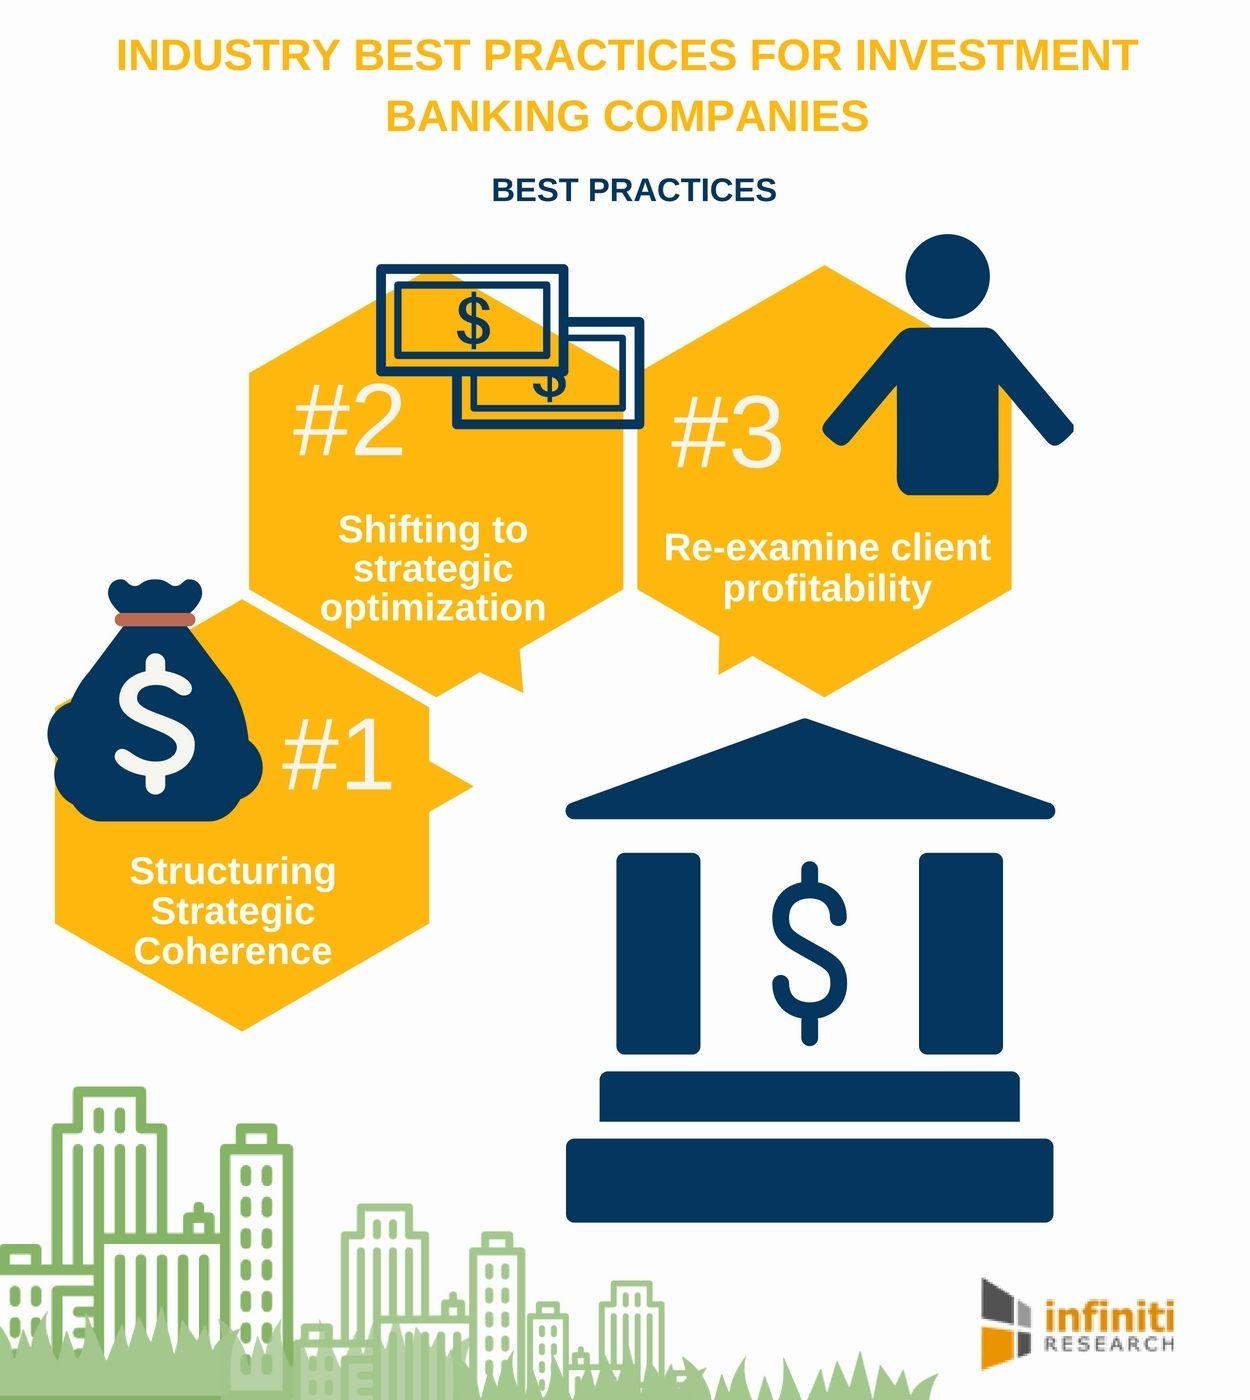 U. S. Invesments Company Logo - Four Best Practices for Investment Banking Companies. Infiniti